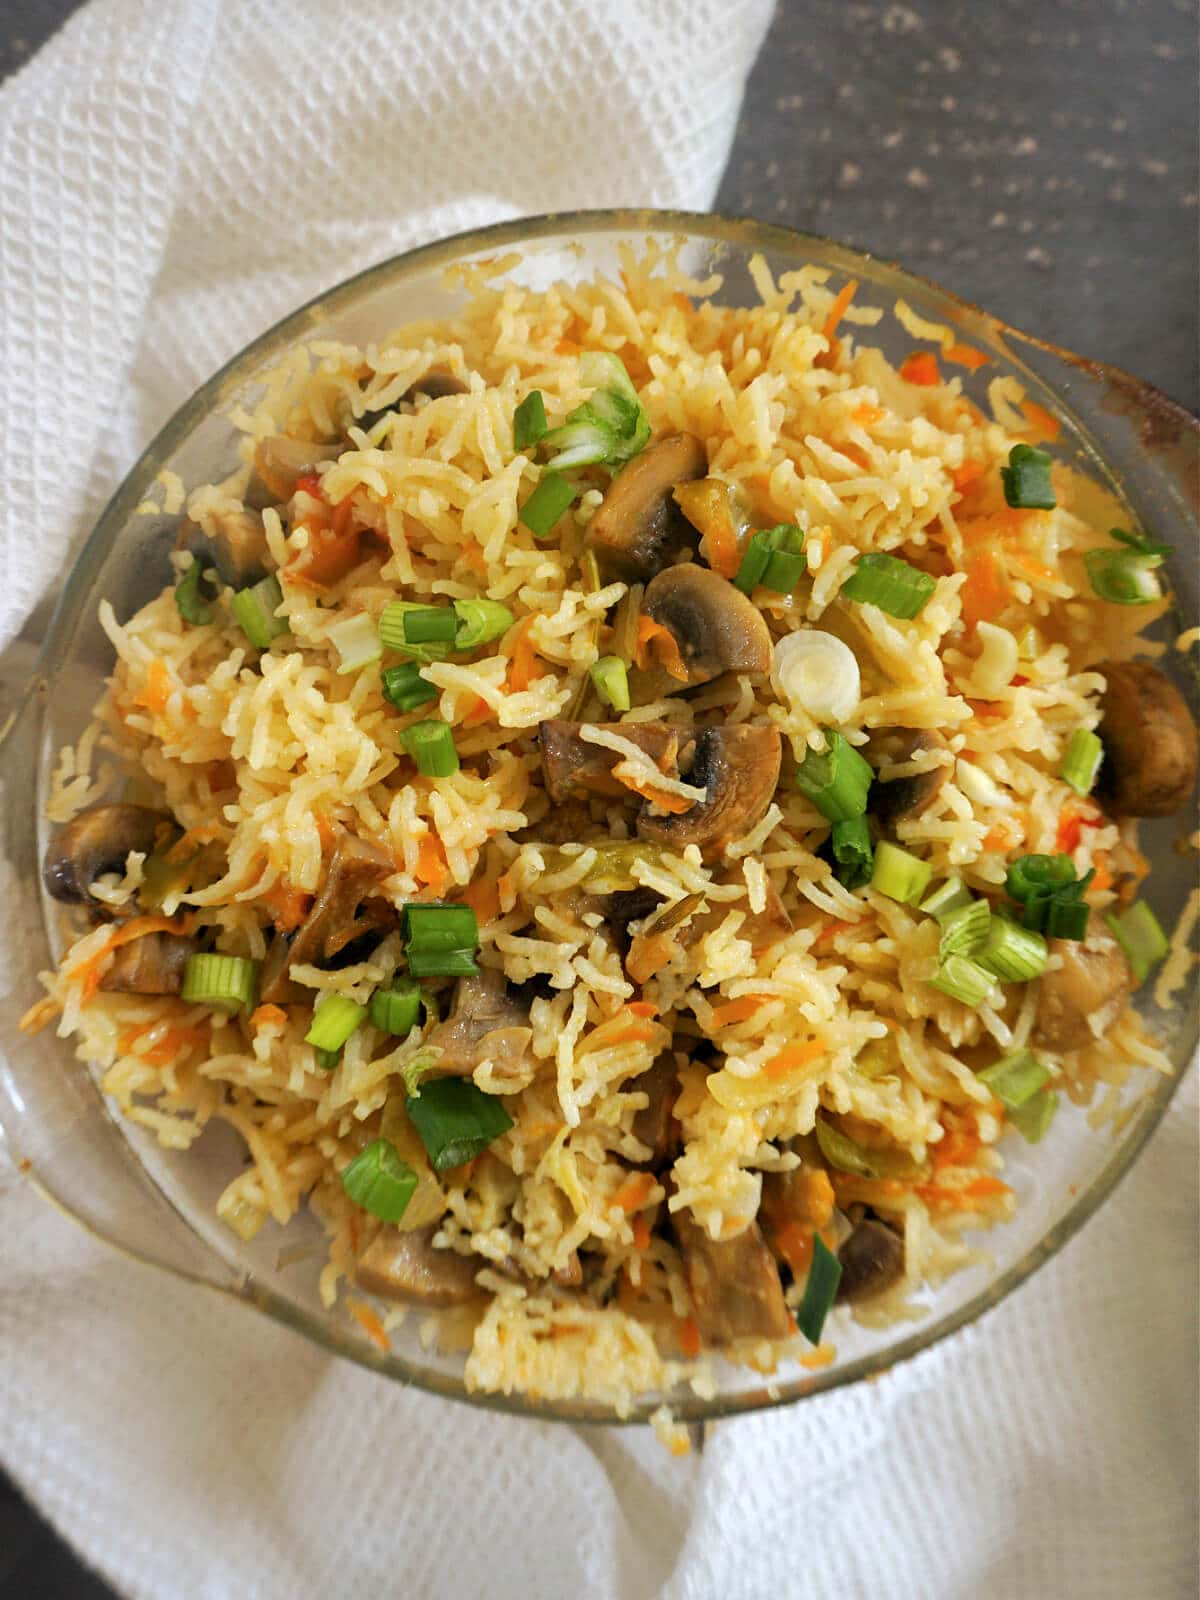 A casserole dish with vegetable rice.